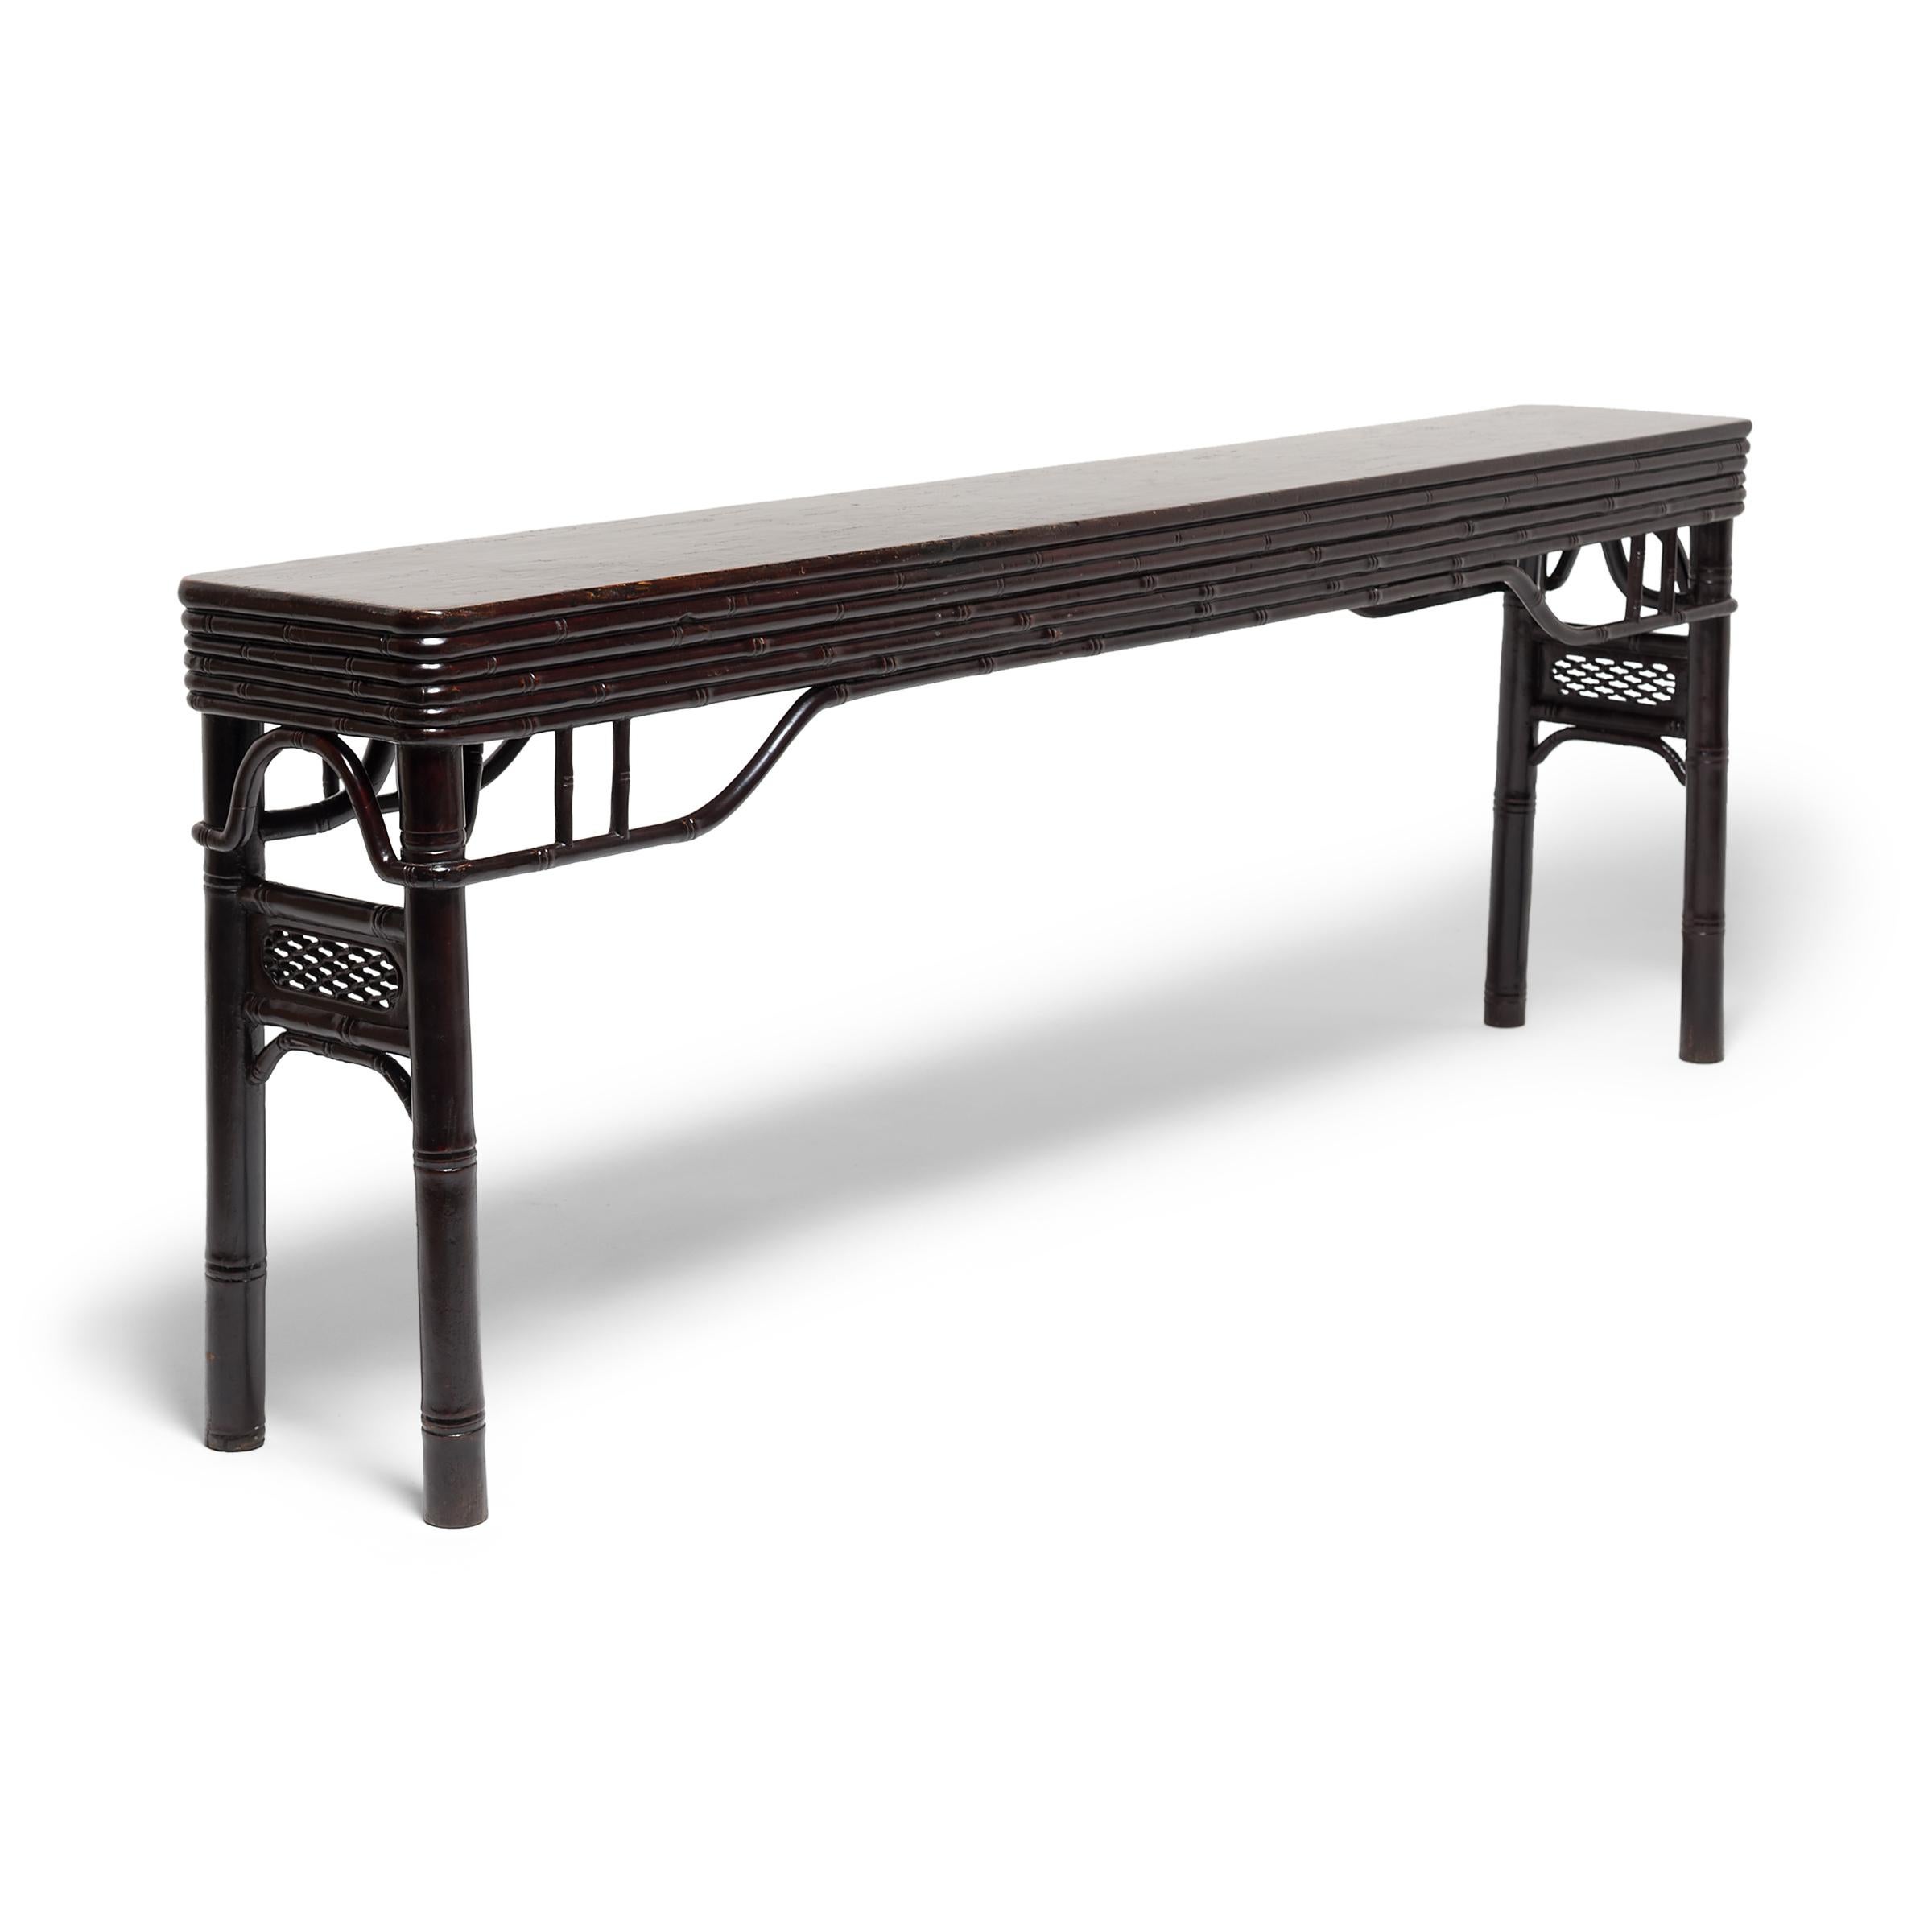 Chinese Faux Bamboo Walnut Console Table, c. 1750